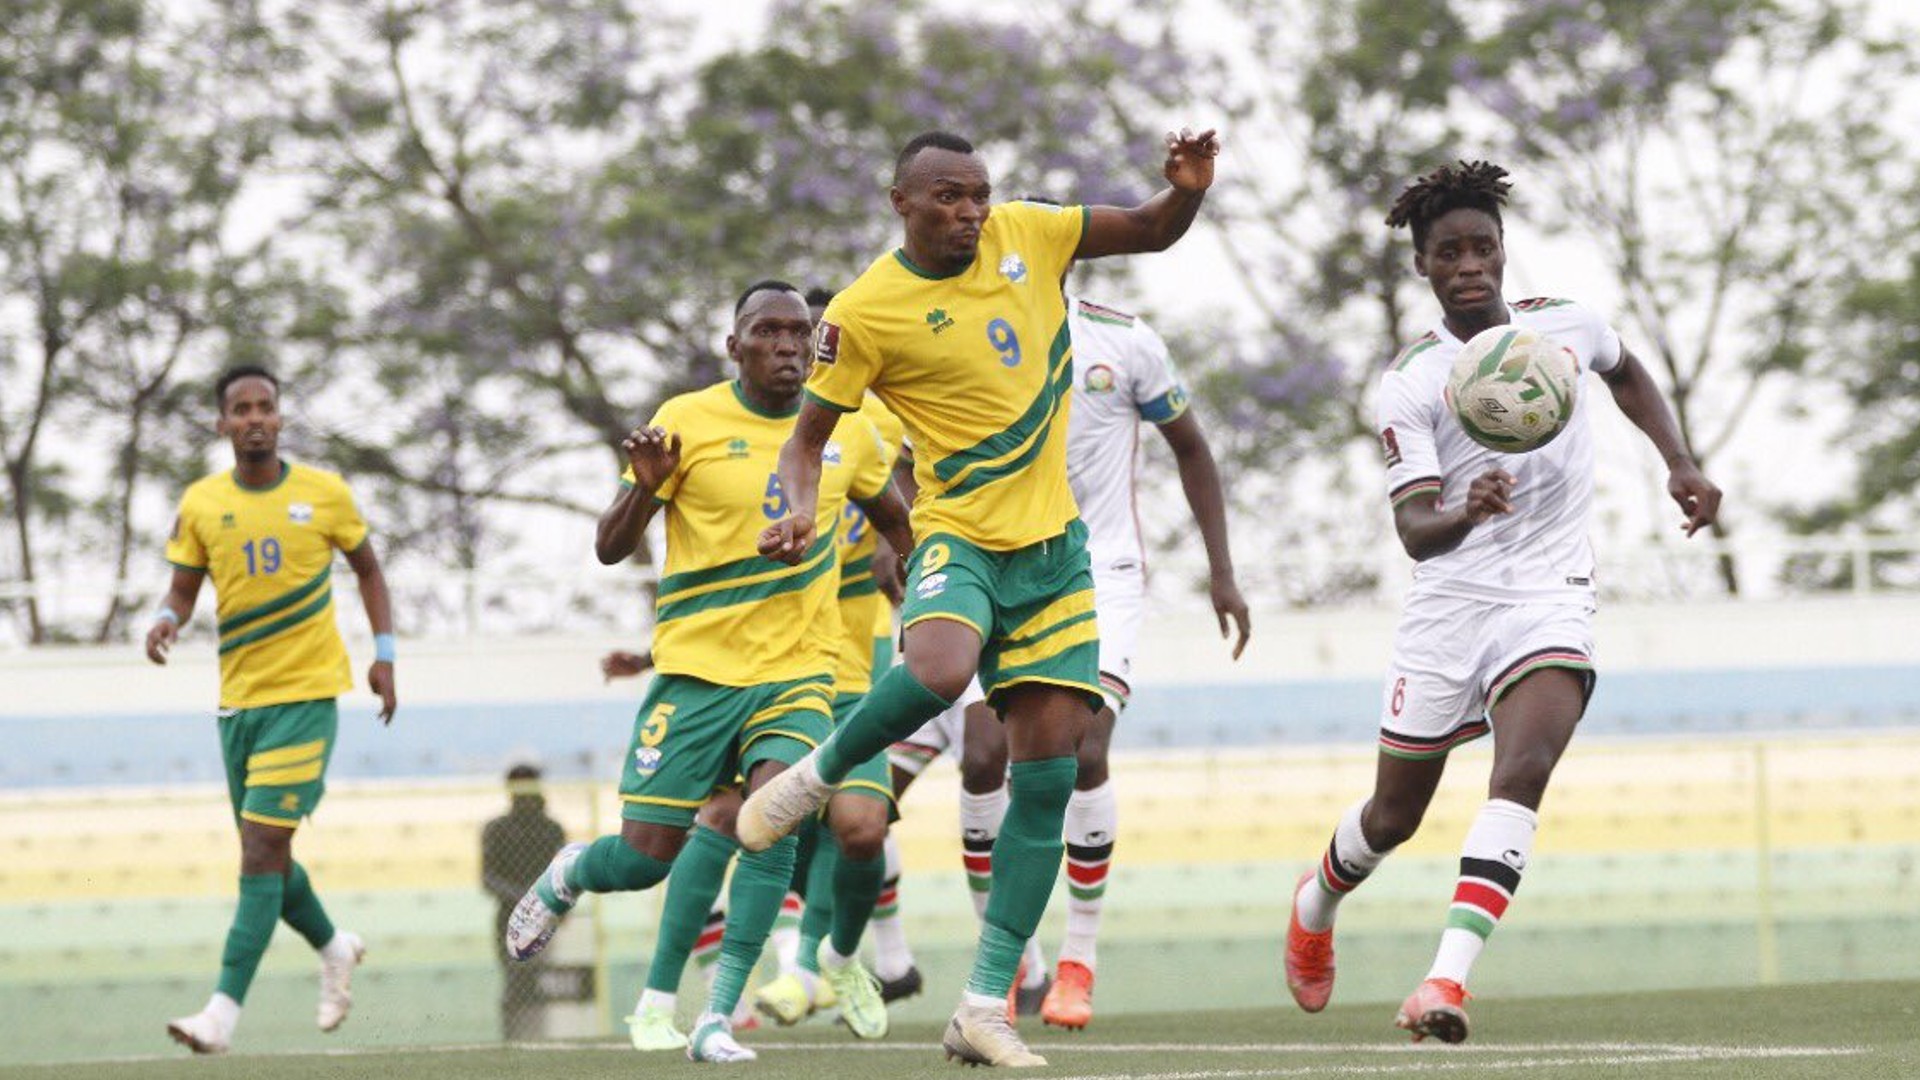 FKF in dilemma as Harambee Stars could play Mali in neutral venue